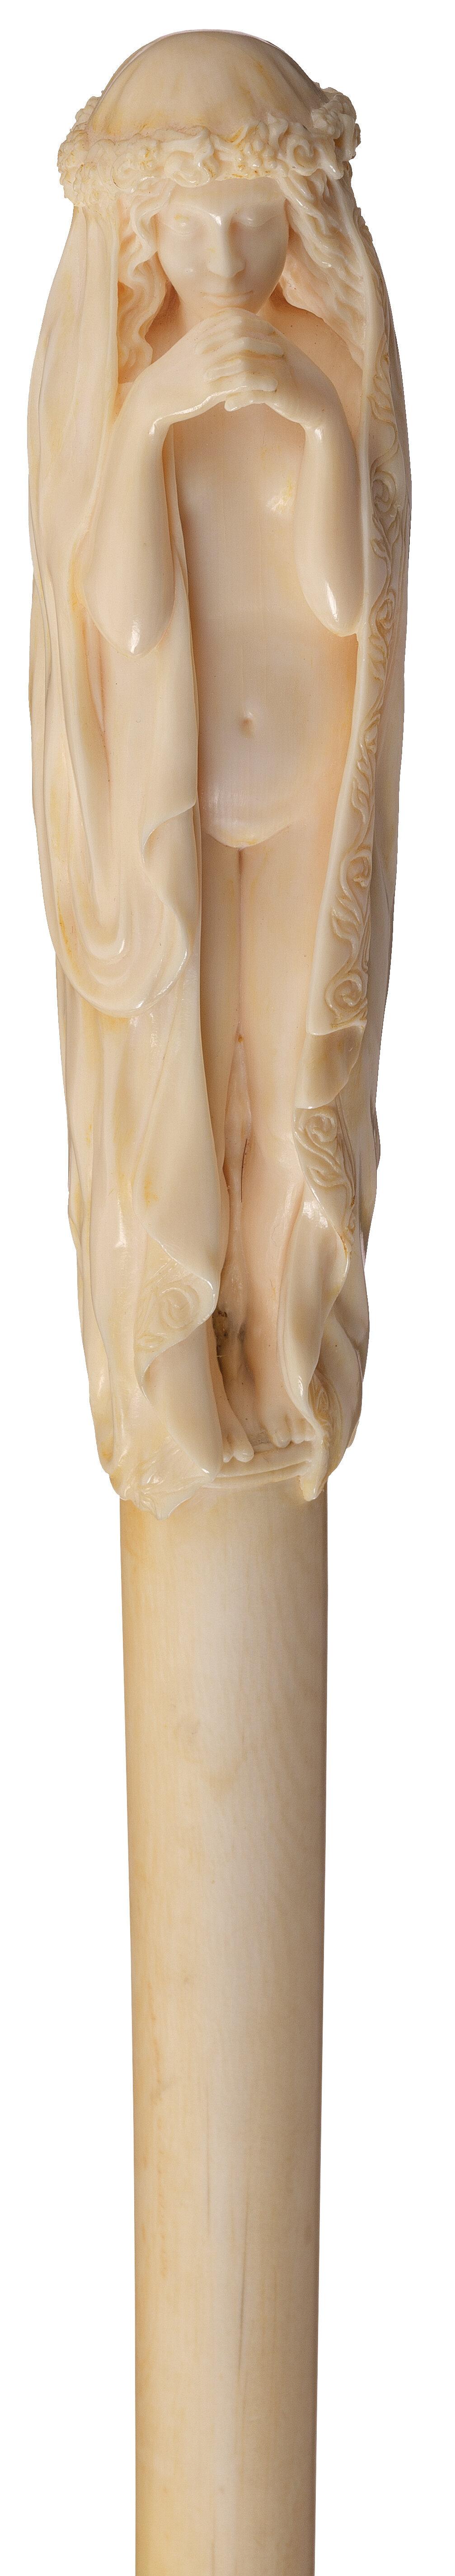 19th Century Ornately Relief Carved "Cleo de Merode"/Nude Cane